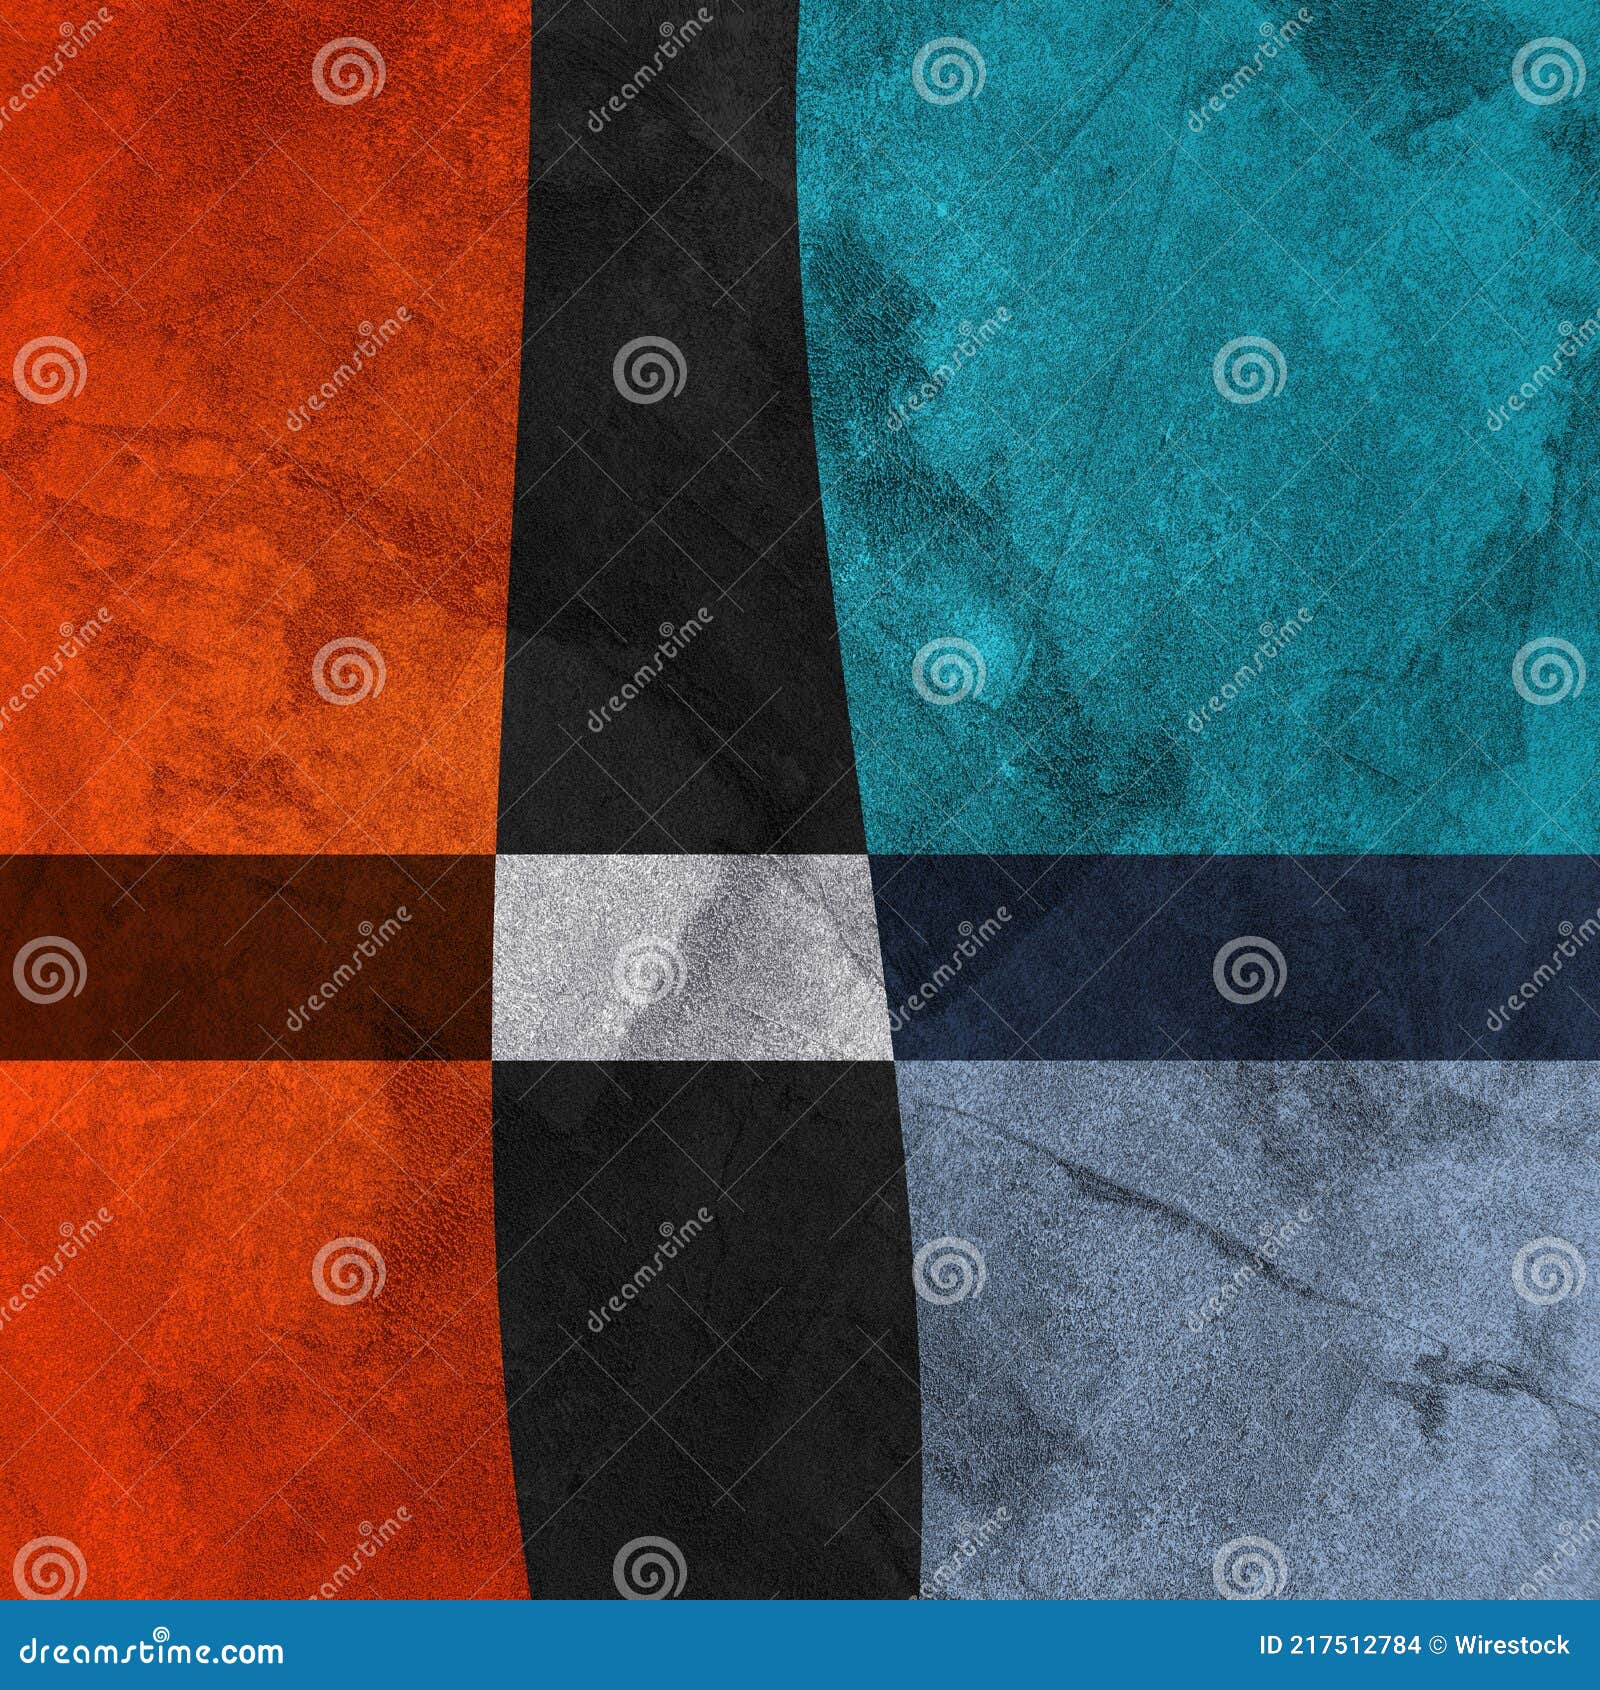 Abstract Art of Geometric Shapes with Colorful Texture Stock Photo ...